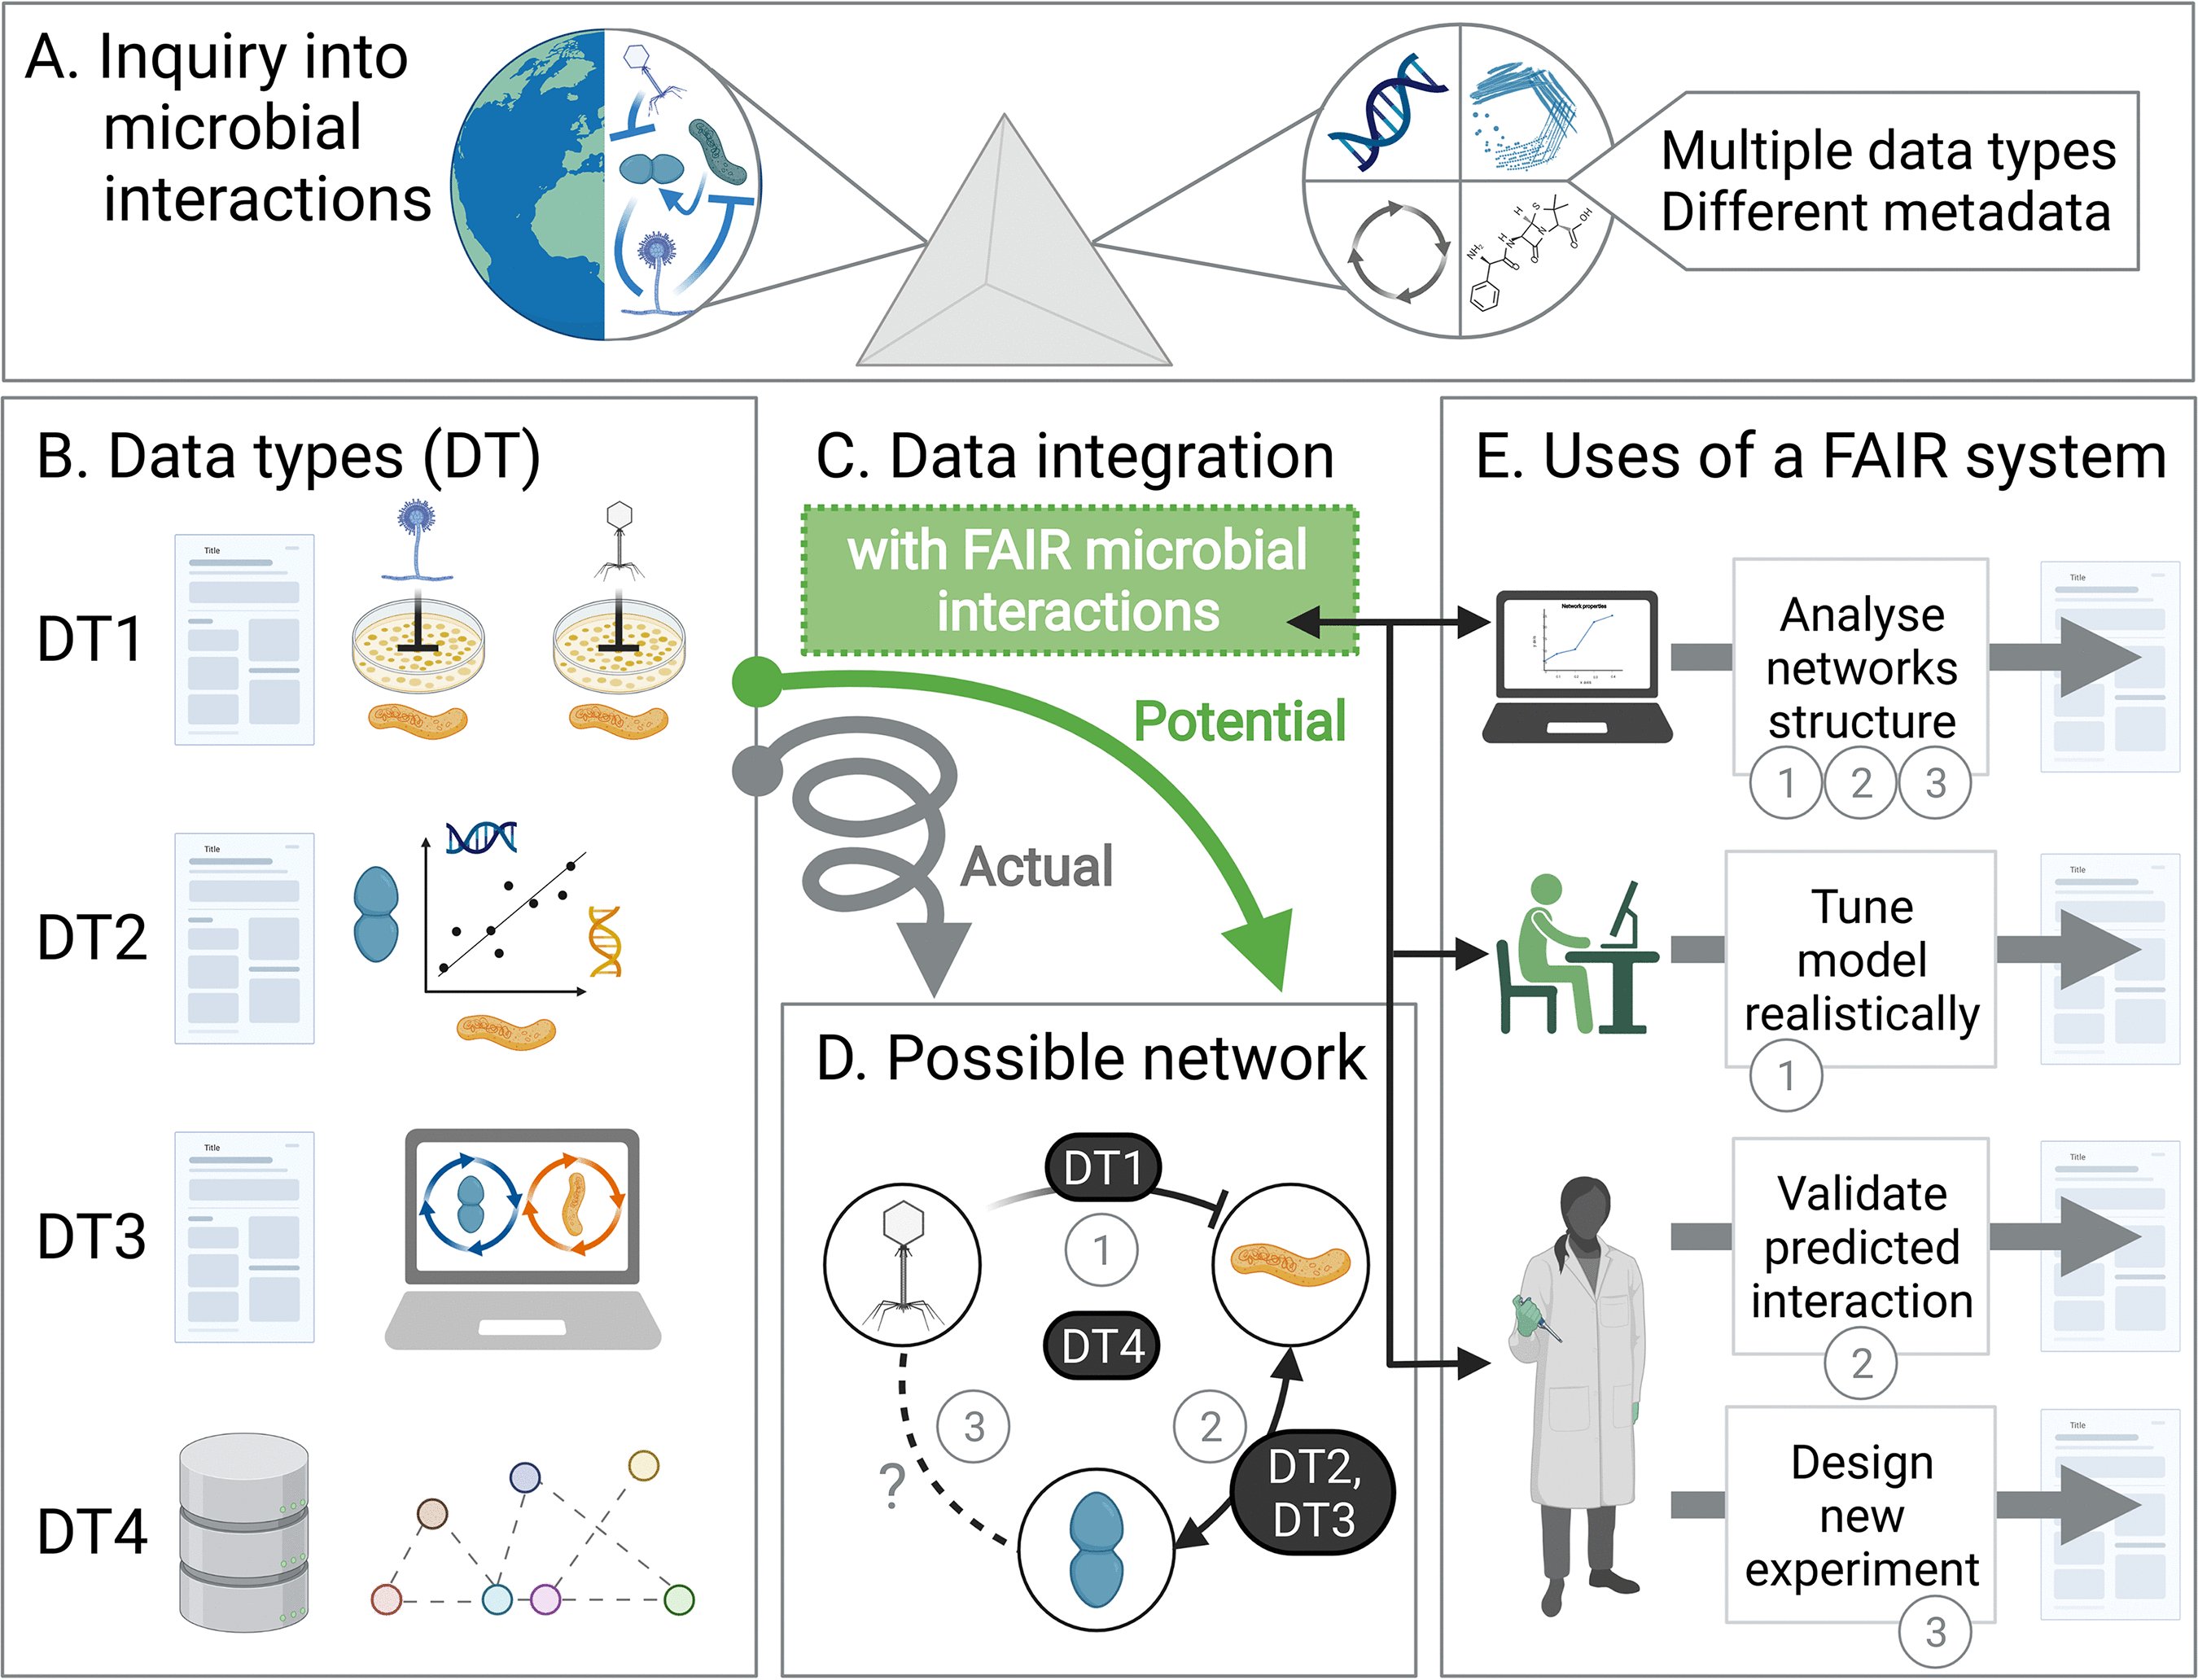 Applying a FAIR system to the study of microbial interactions and correlations